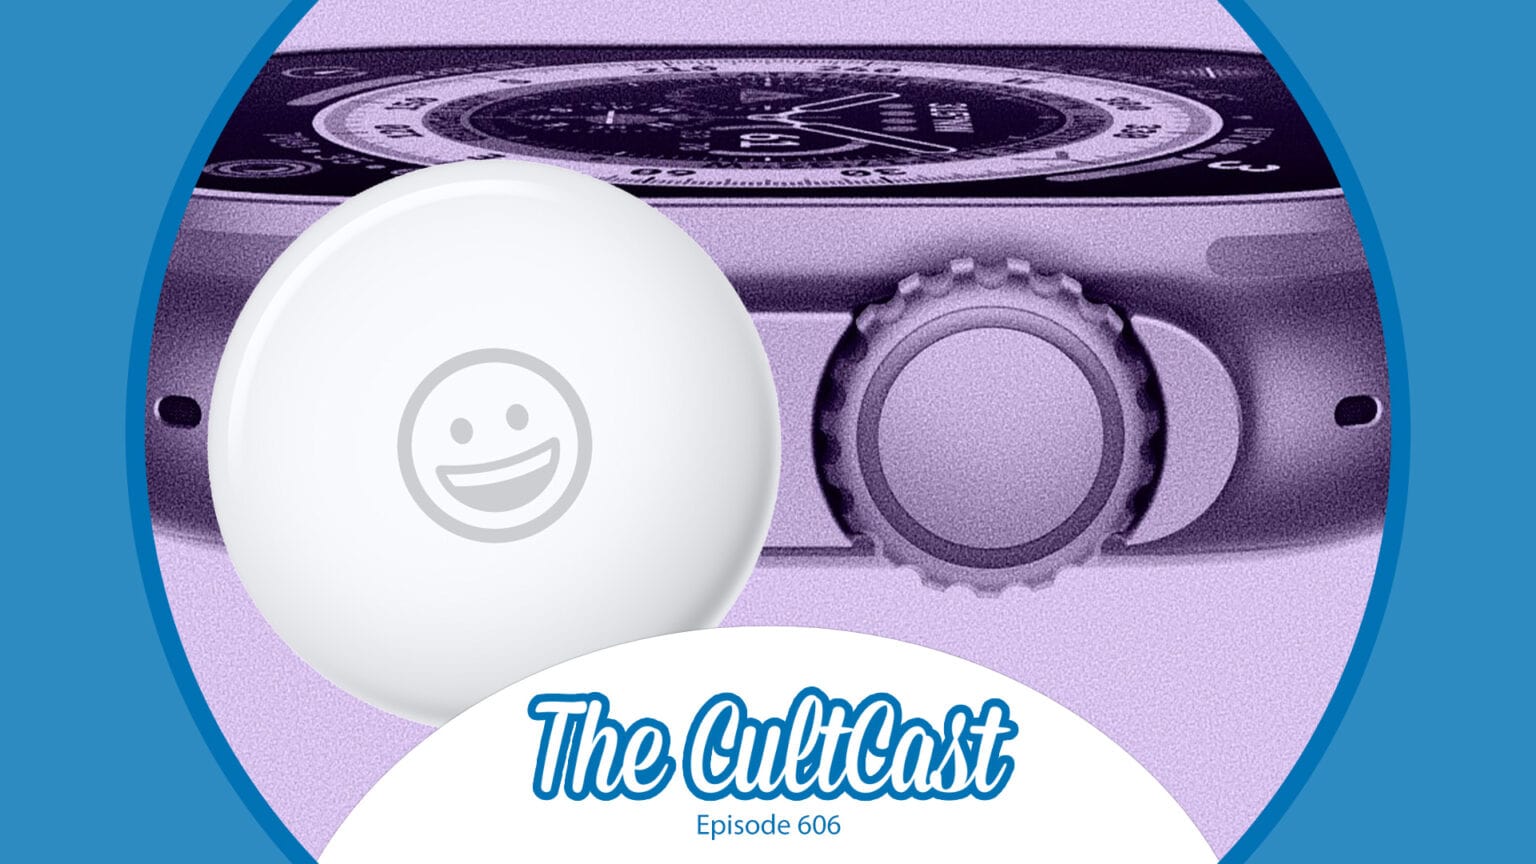 An Apple AirTag and an Apple Watch Ultra: We're talking the latest Apple rumors on The CultCast, episode 606.